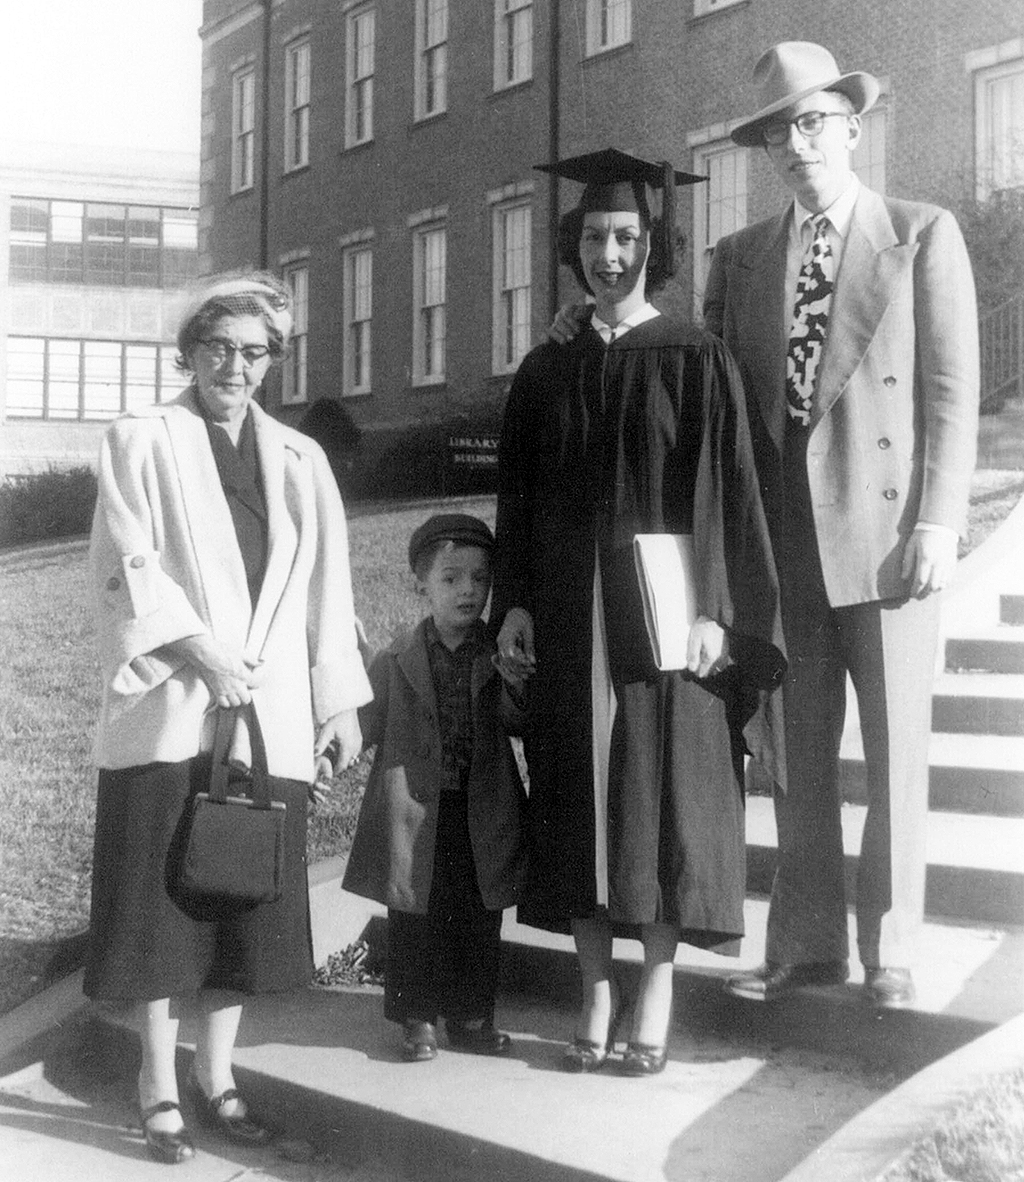 Helen Schlueter and family at her graduation